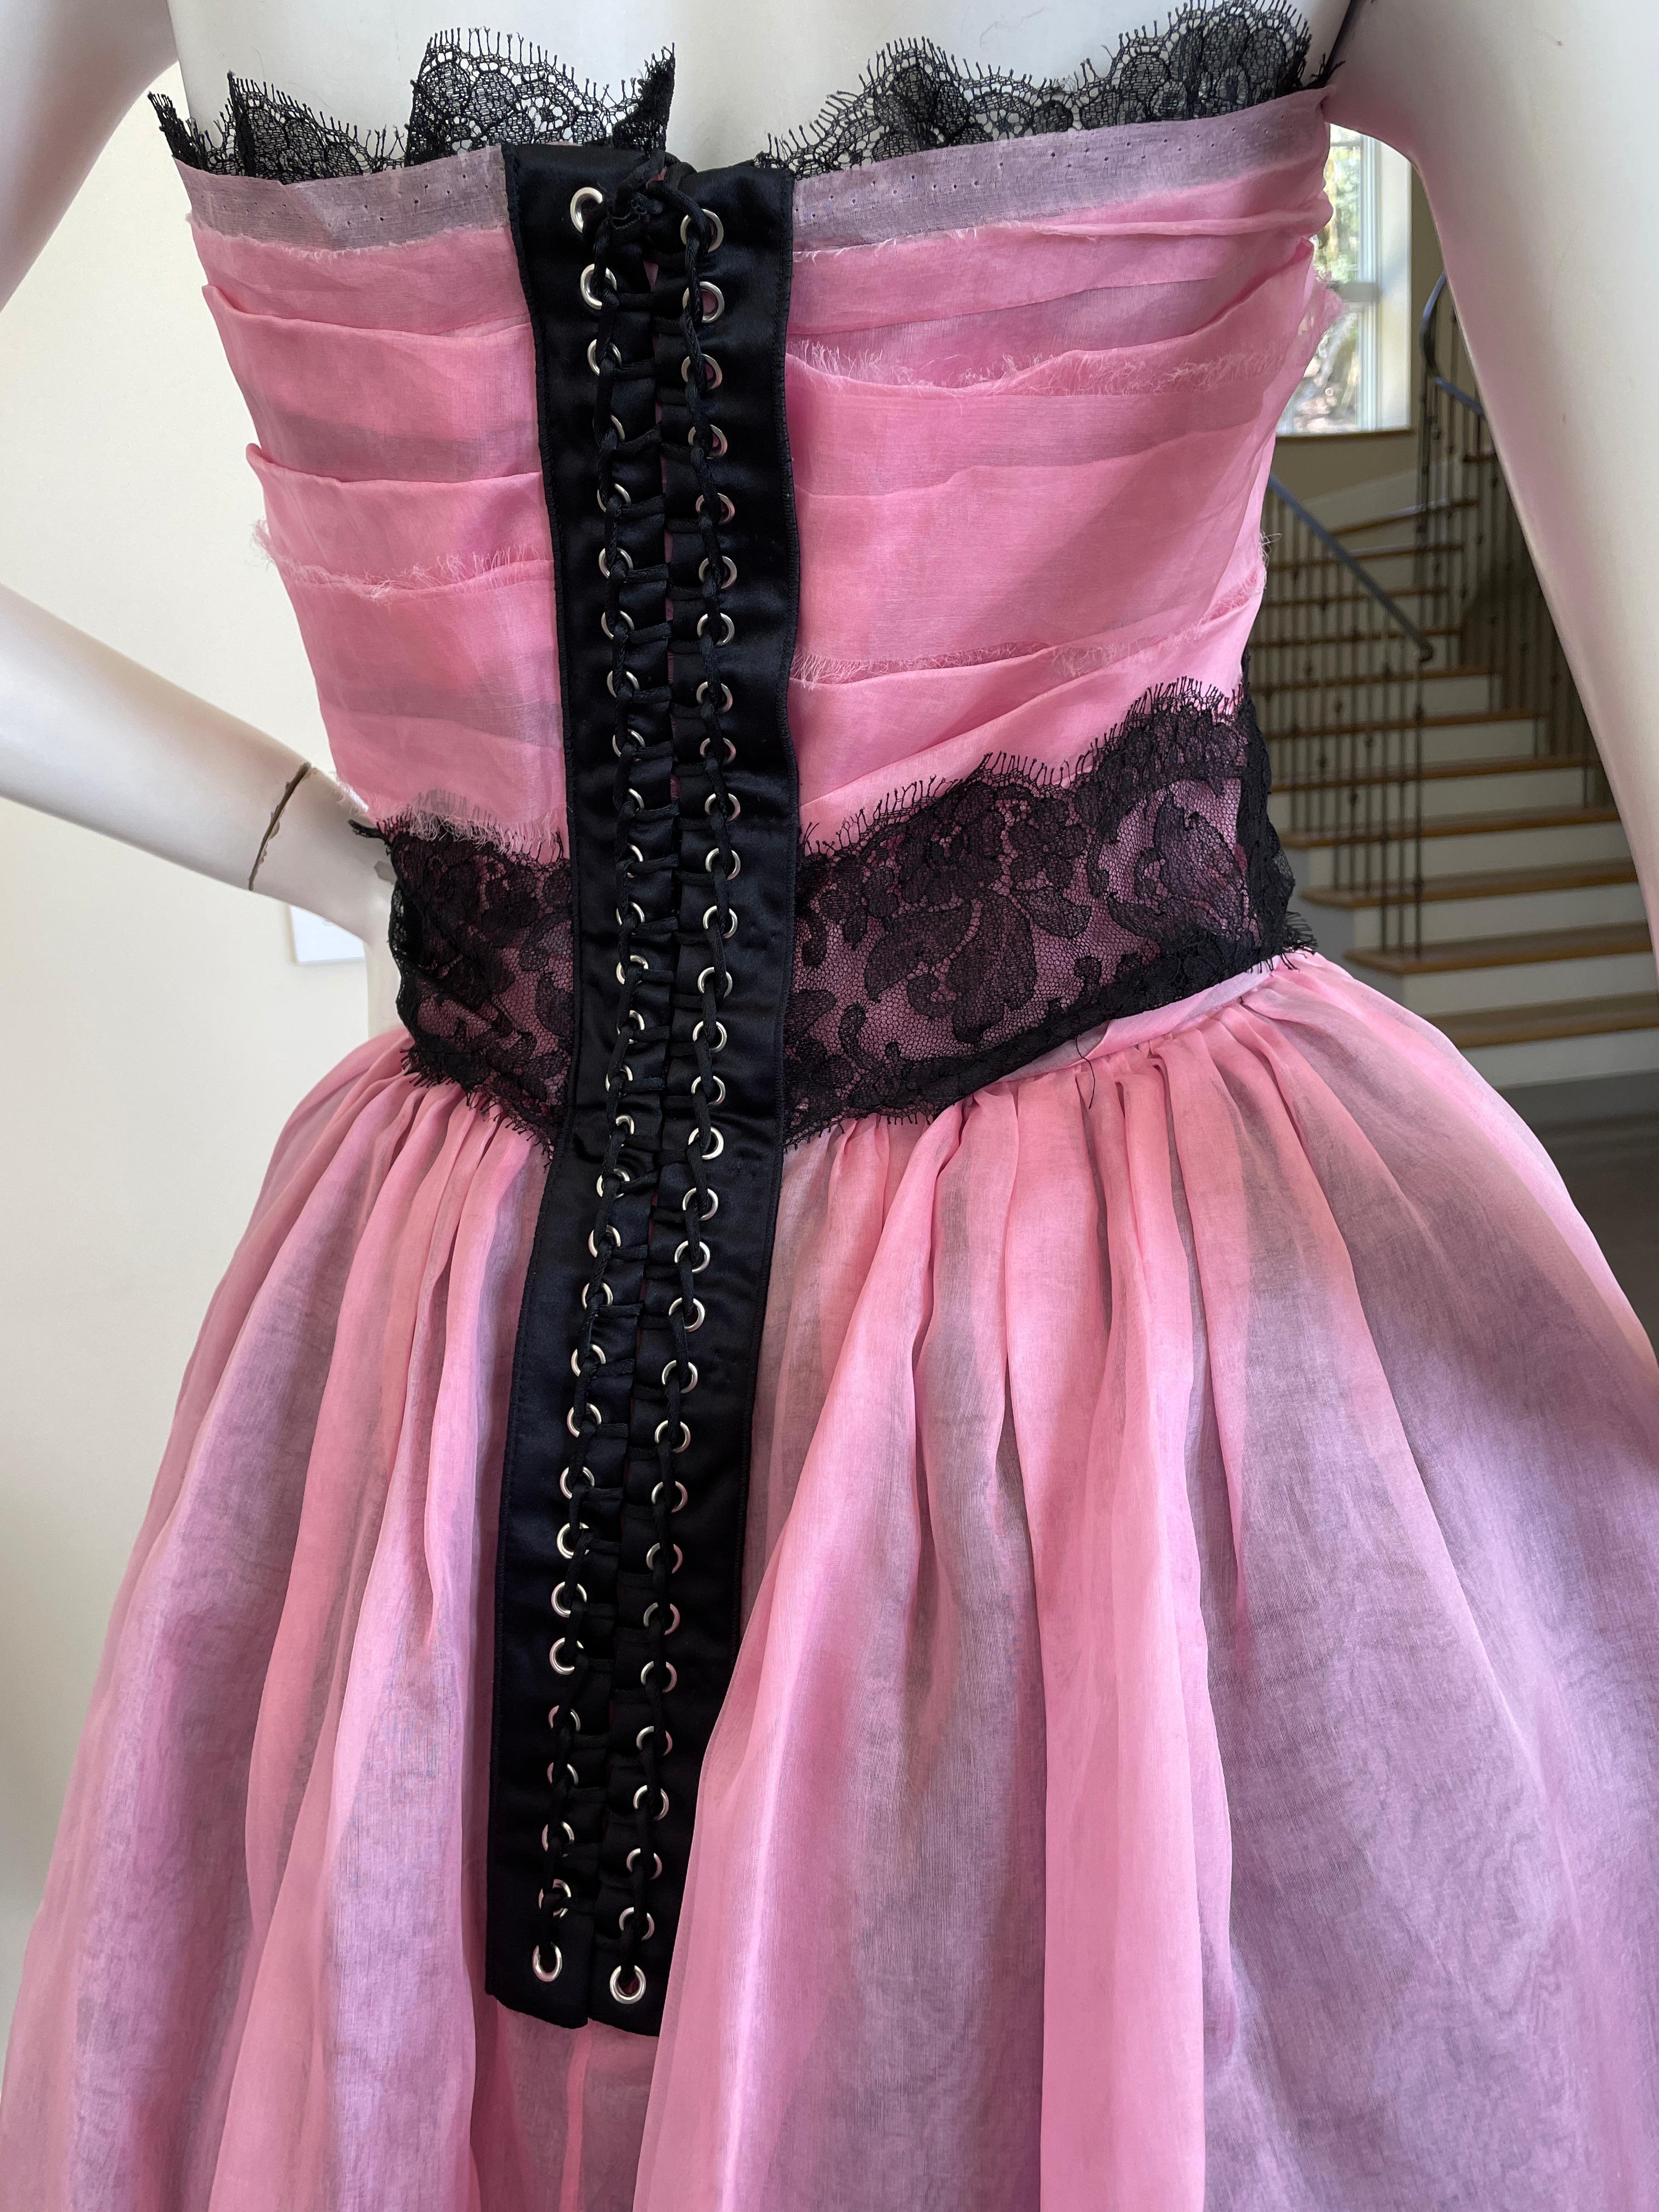 Dolce & Gabbana Pink 1950's Style Vintage Cocktail Dress w Corset Lacing Detail  For Sale 2